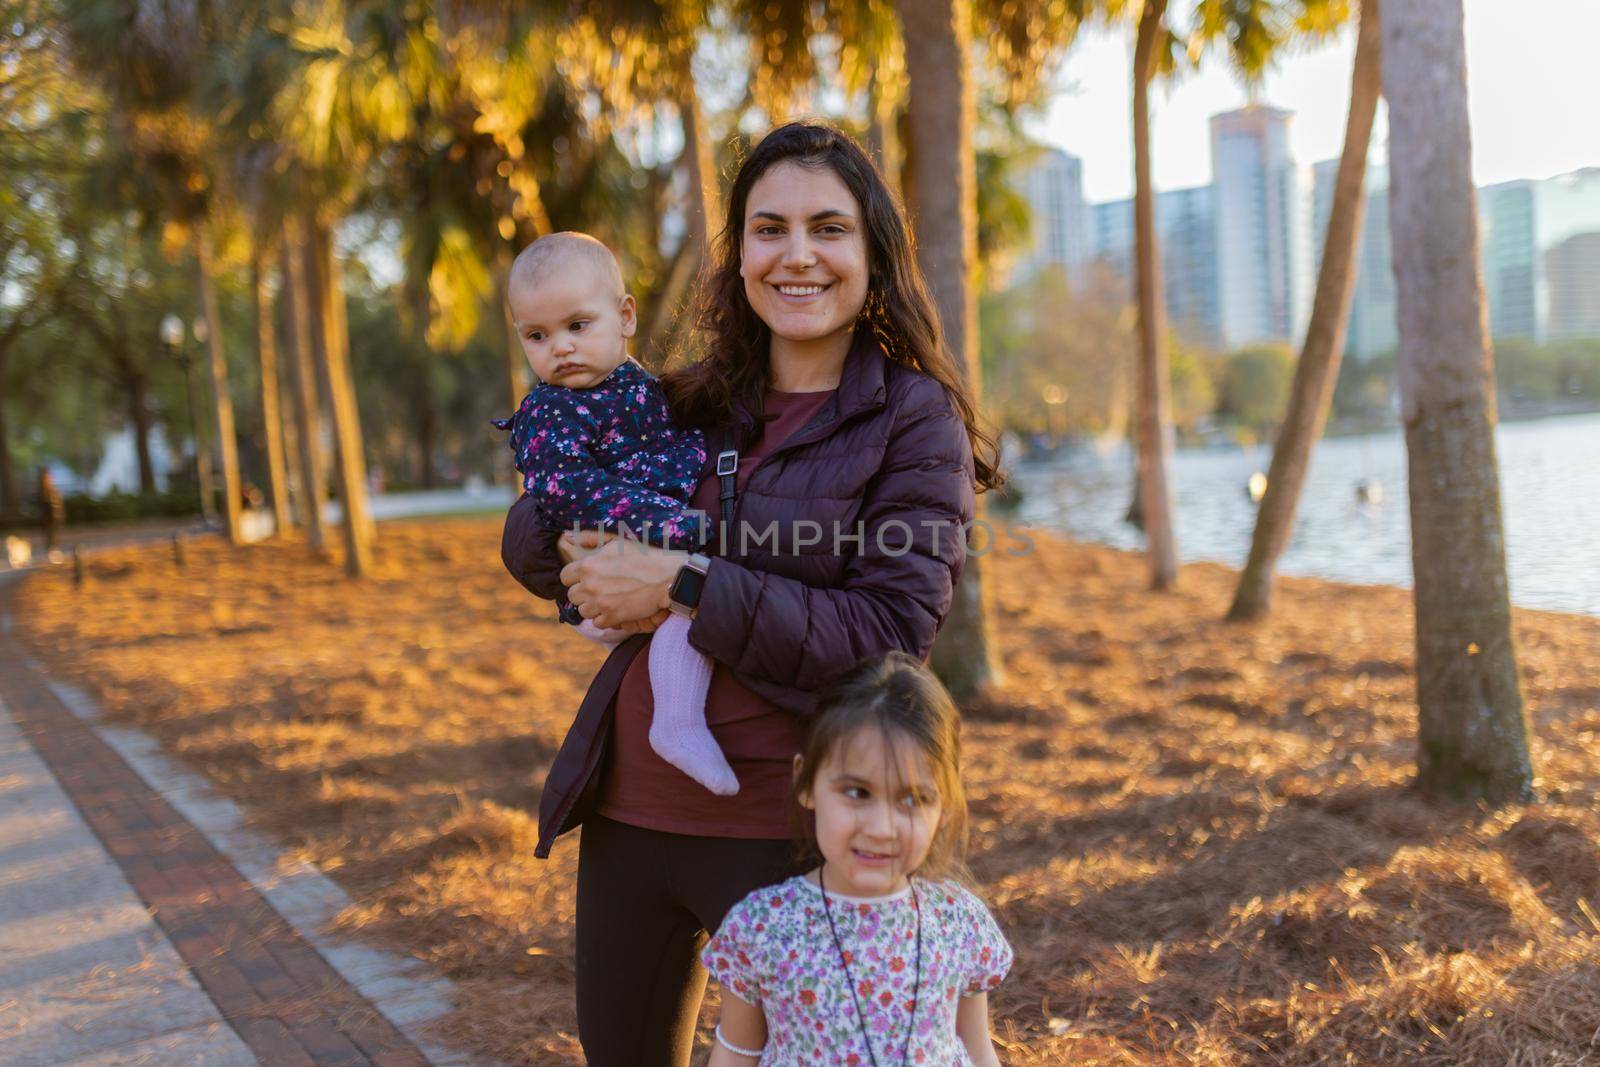 Beautiful view of happy mother and her adorable young daughters with trees and sunset sunlight as background. Portrait of little girl and smiling woman holding baby outside. Lovely family outdoors